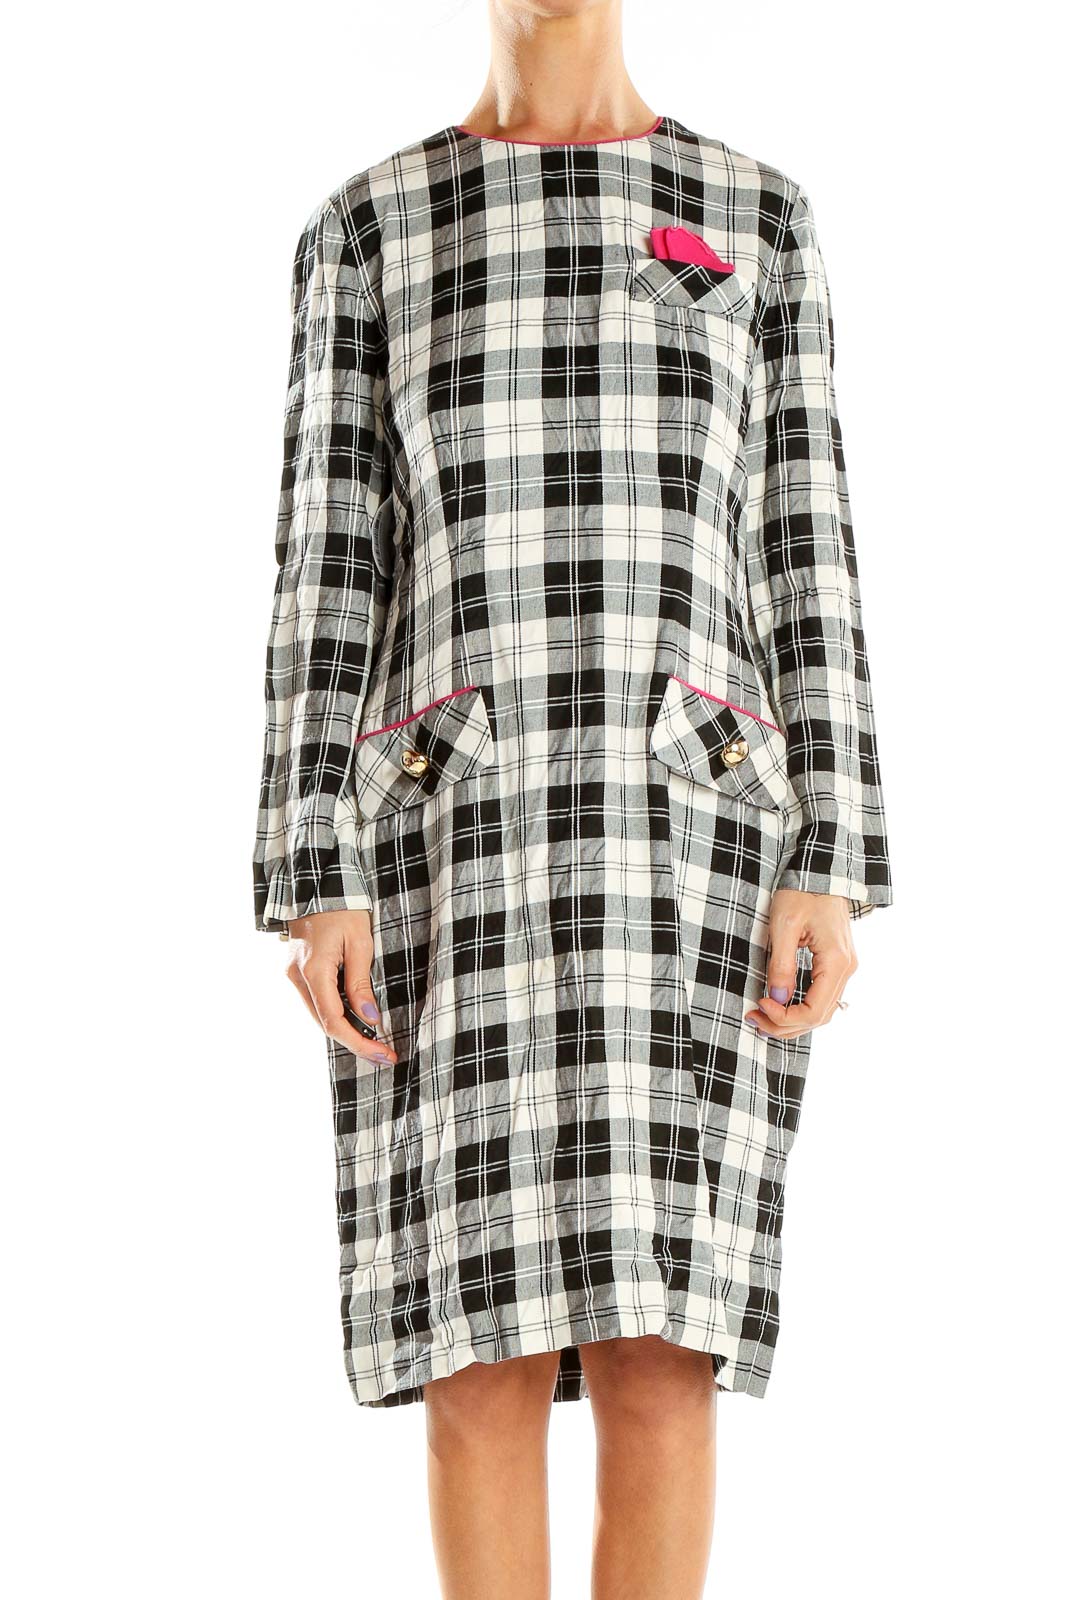 Black And White Vintage Plaid Sheath Dress With Pink Trim Front